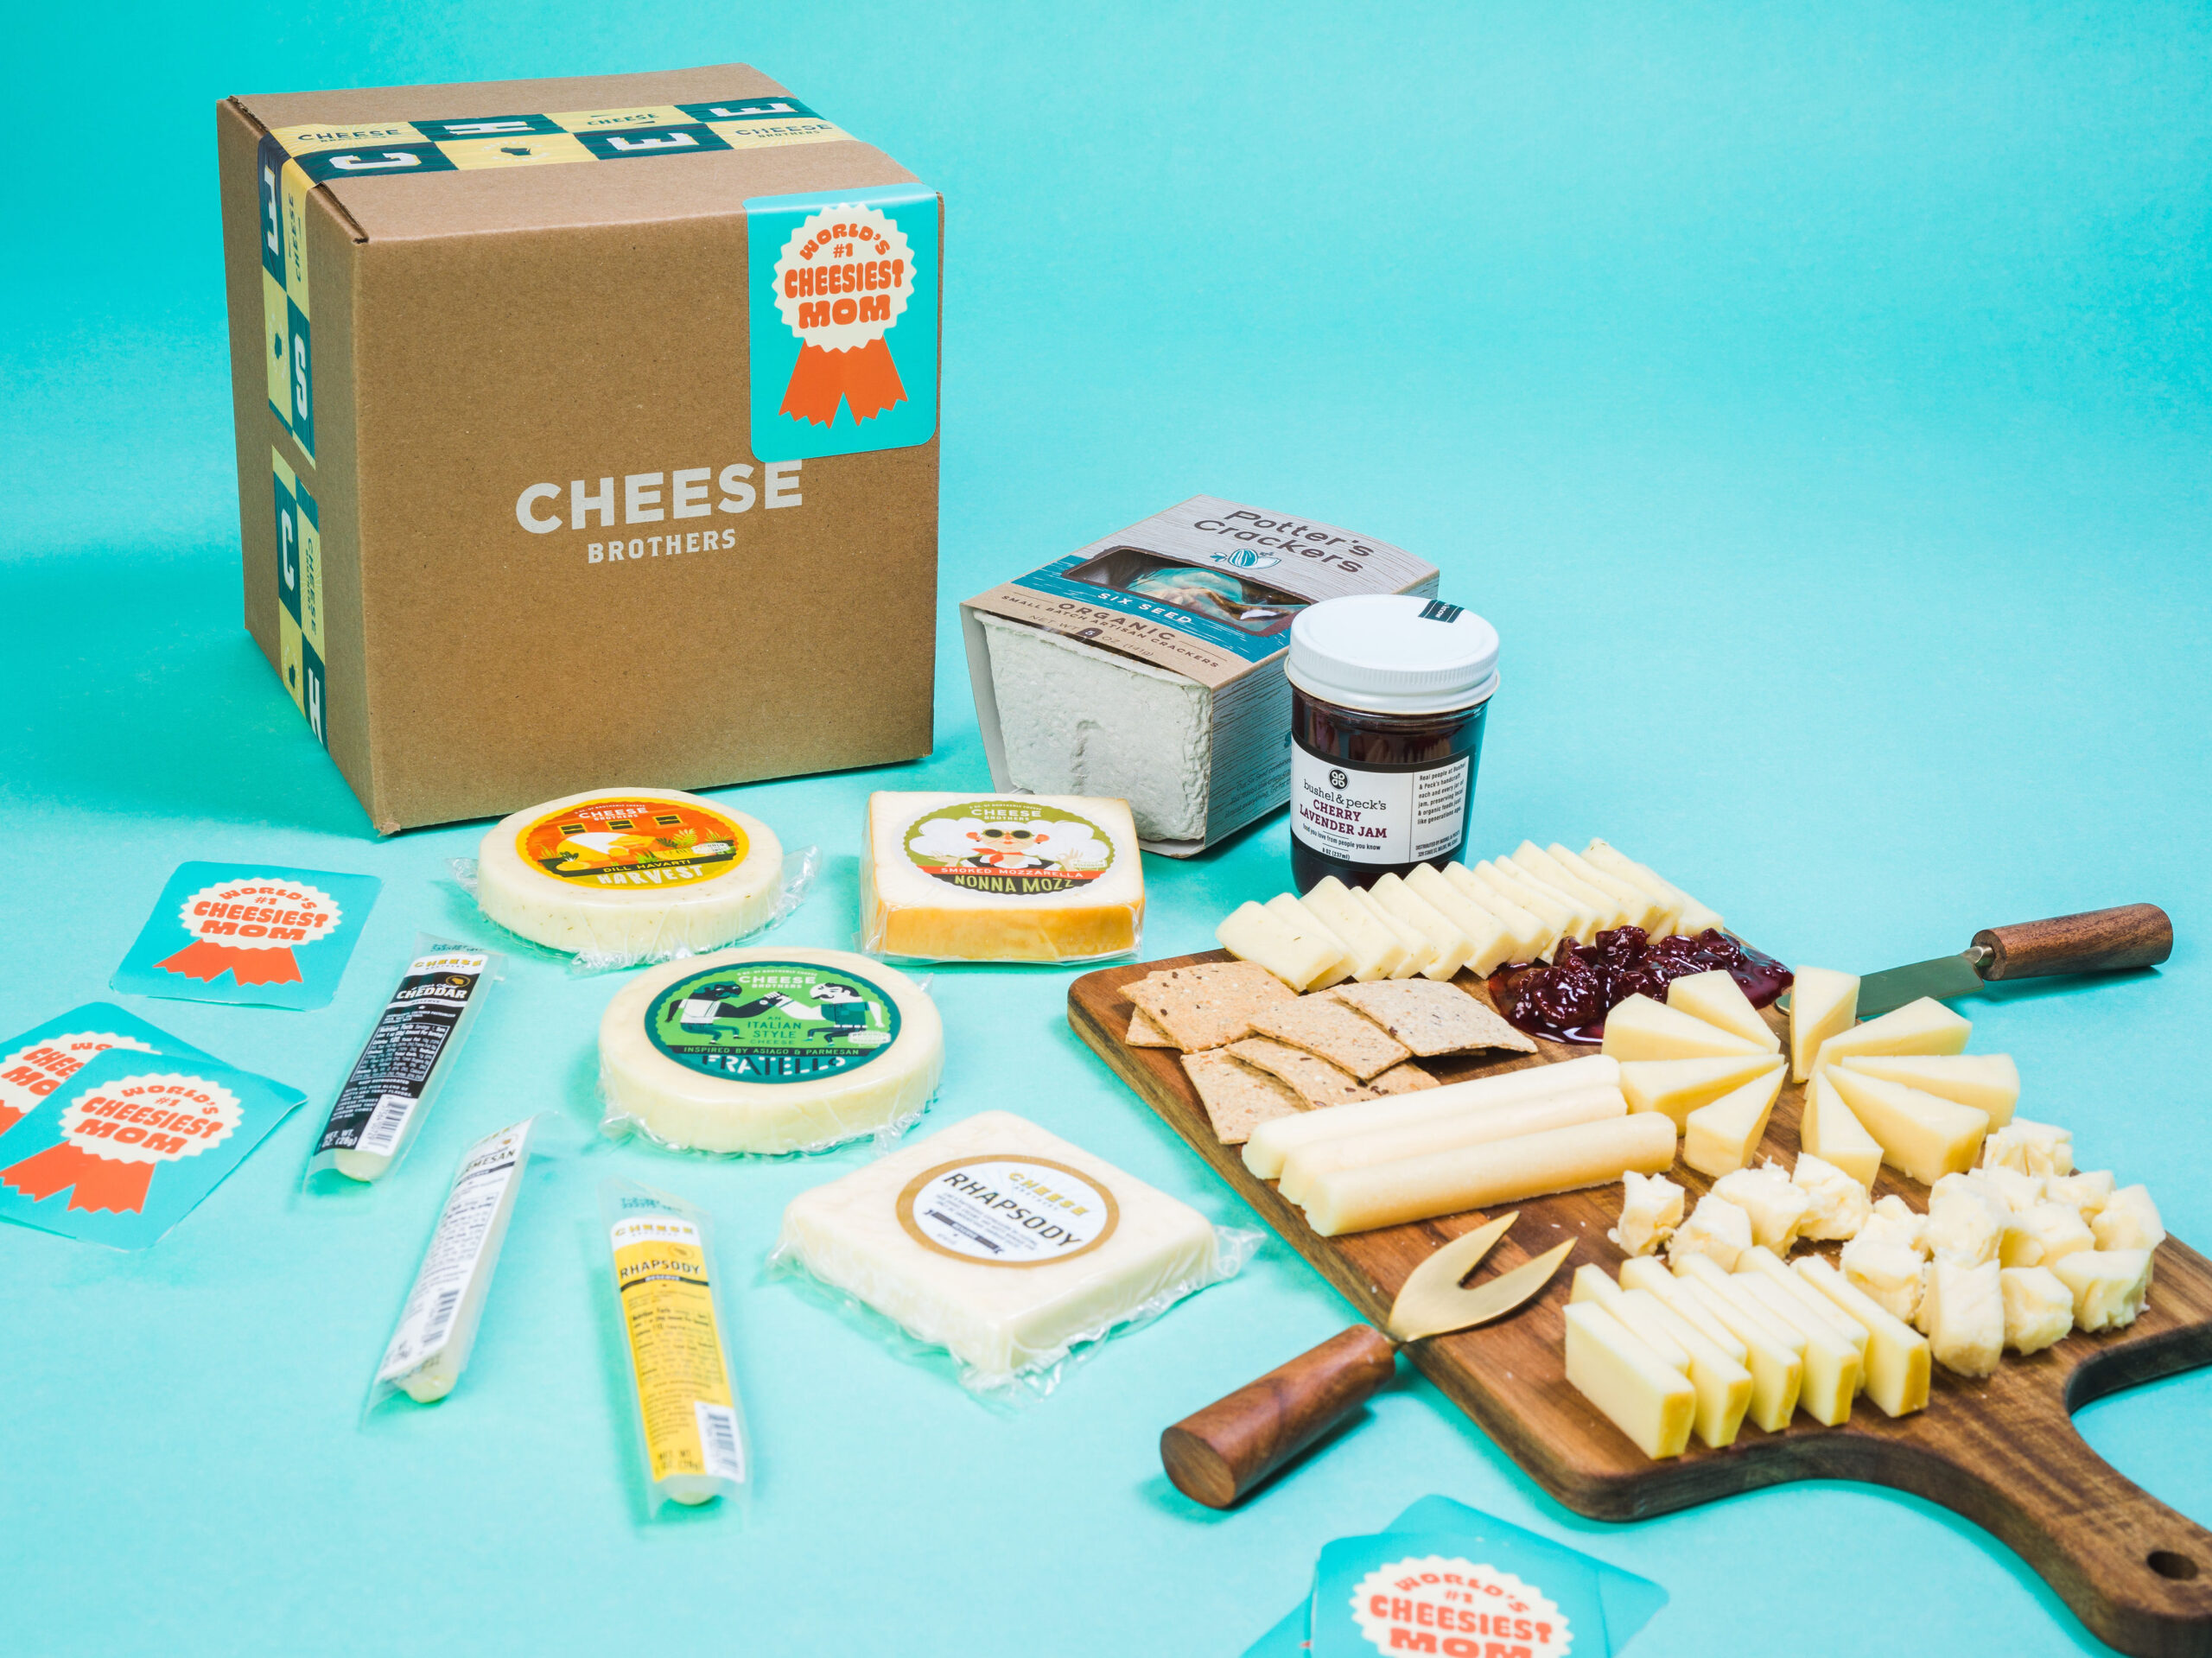 “World’s Cheesiest Mom” Gift Basket from Cheese Brothers for Mother's Day